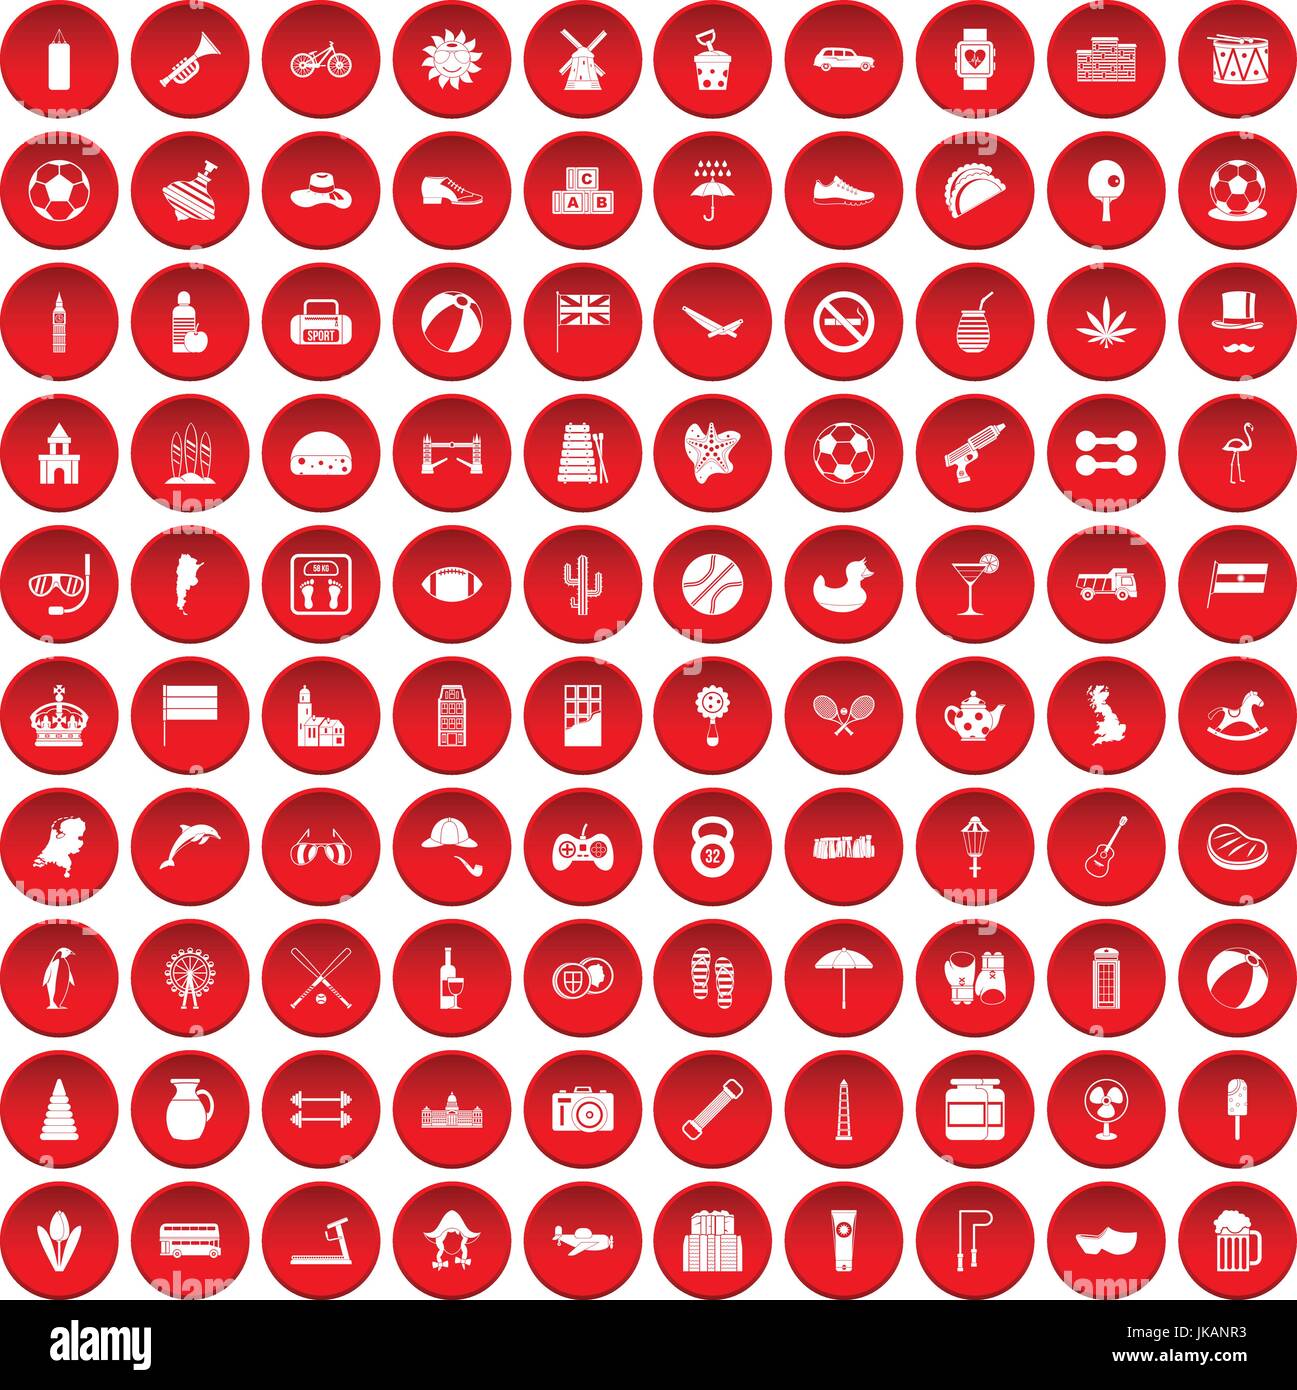 100 ball icons set red Stock Vector